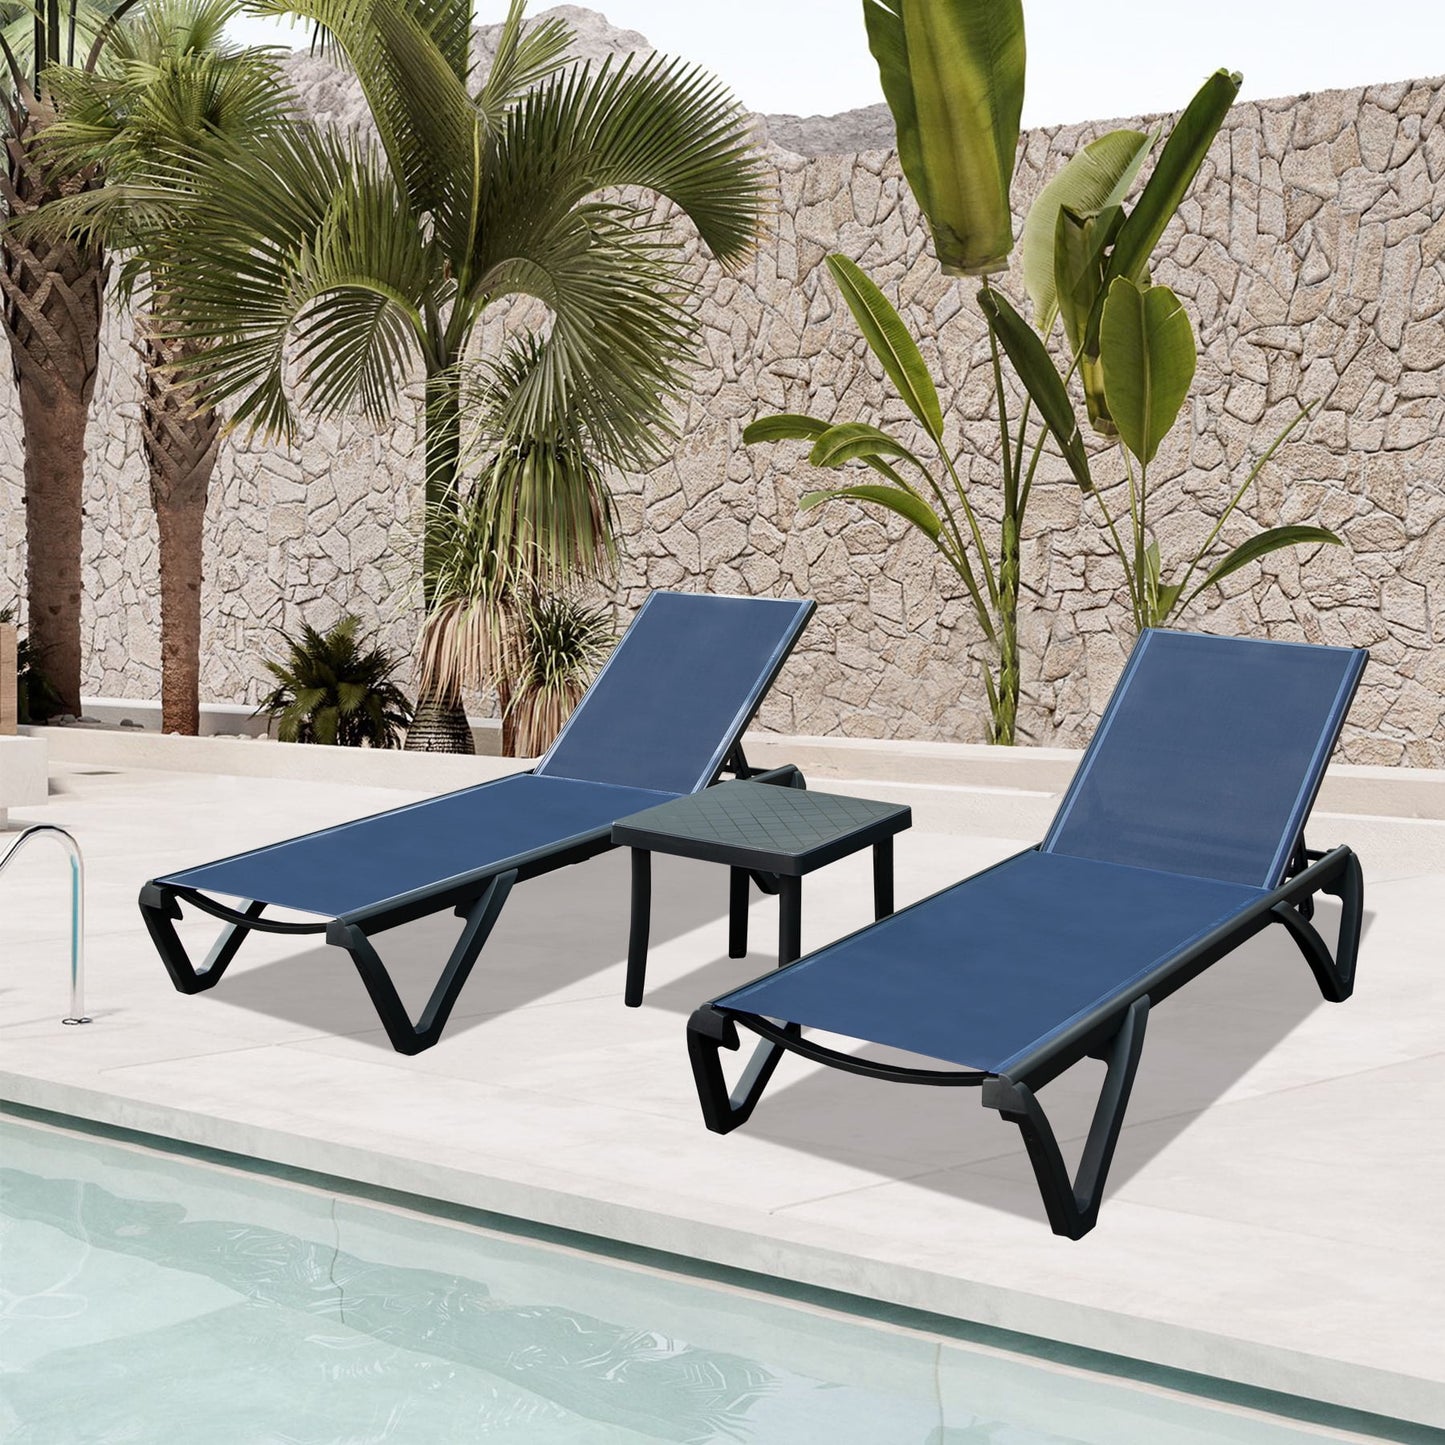 Domi Pool Lounge Chairs Set of 2, Adjustable Aluminum Plastic Outdoor Chaise Lounge, All Weather for Outside Beach Poolside Lawn-Grey Textilene